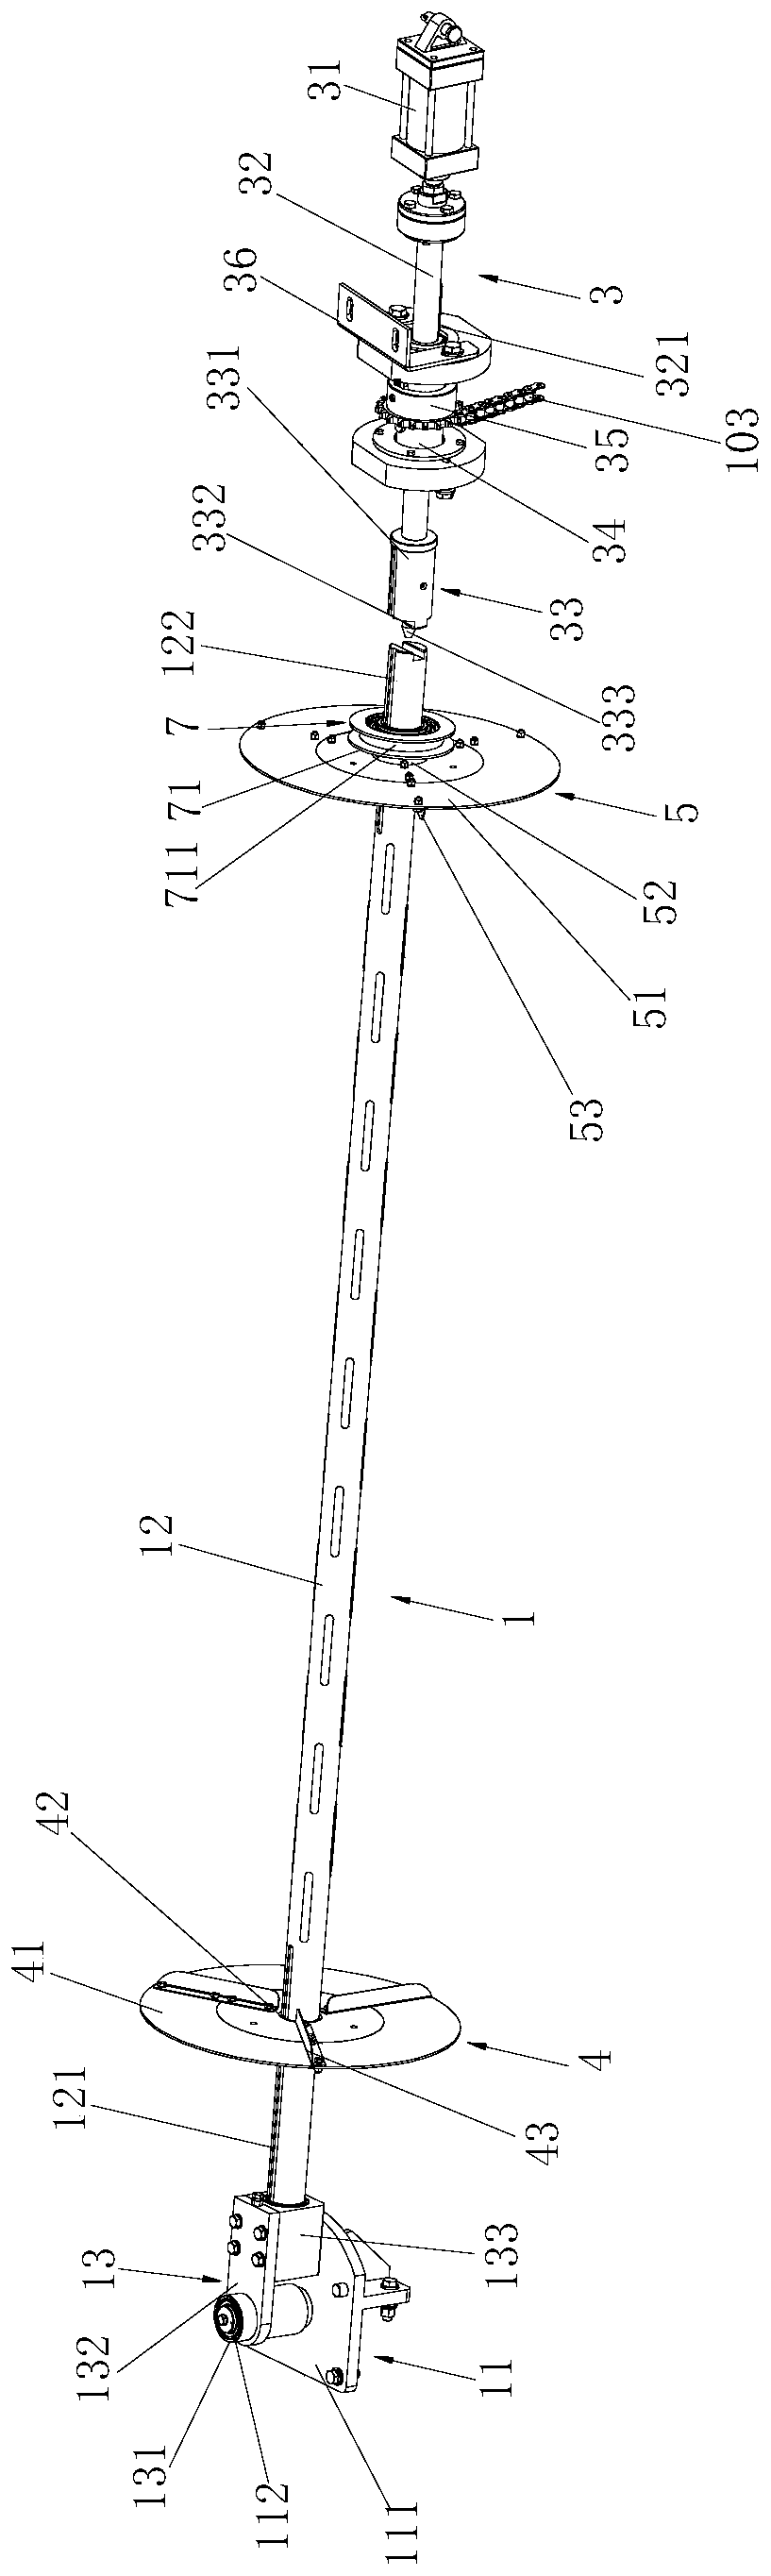 Cloth roll wrapping positioning device and cloth inspecting roll wrapping machine